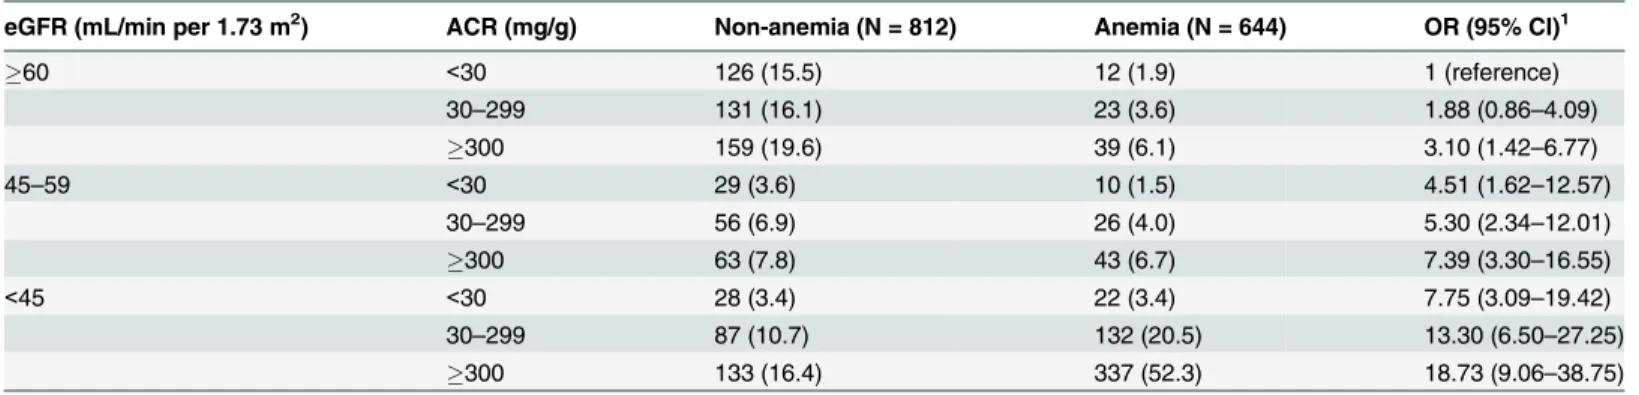 Table 3. Odds ratios for anemia based on the cross-categorization of albuminuria and the eGFR.